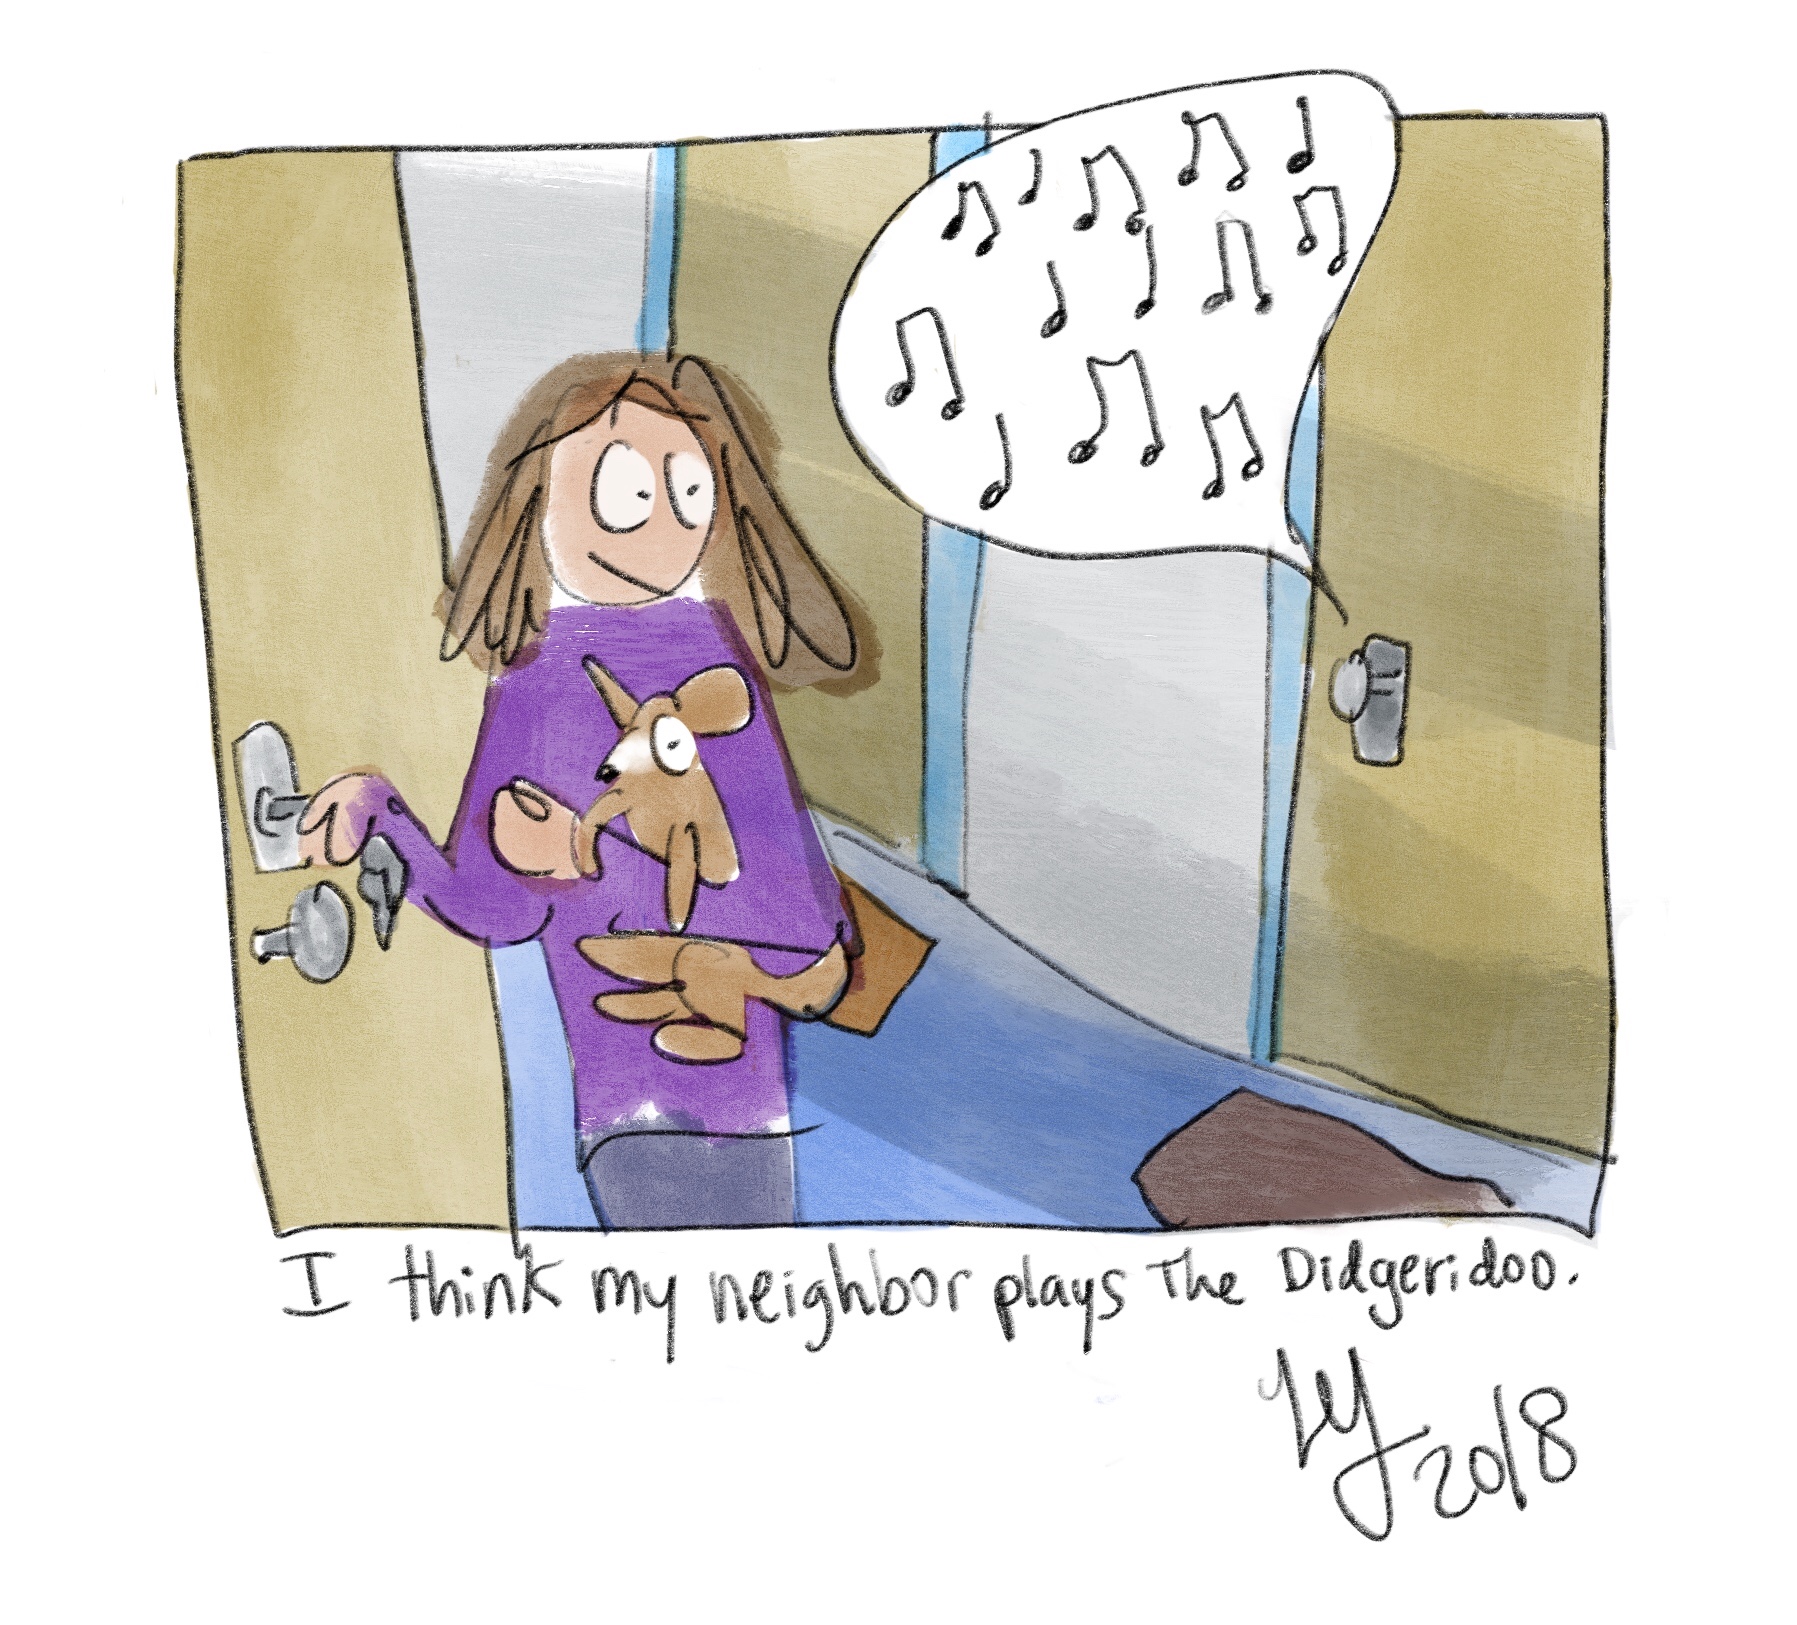 I drew this comic because I keep hearing didgeridoo music coming from my neighbor's place. This is a funny autobiographical comic.